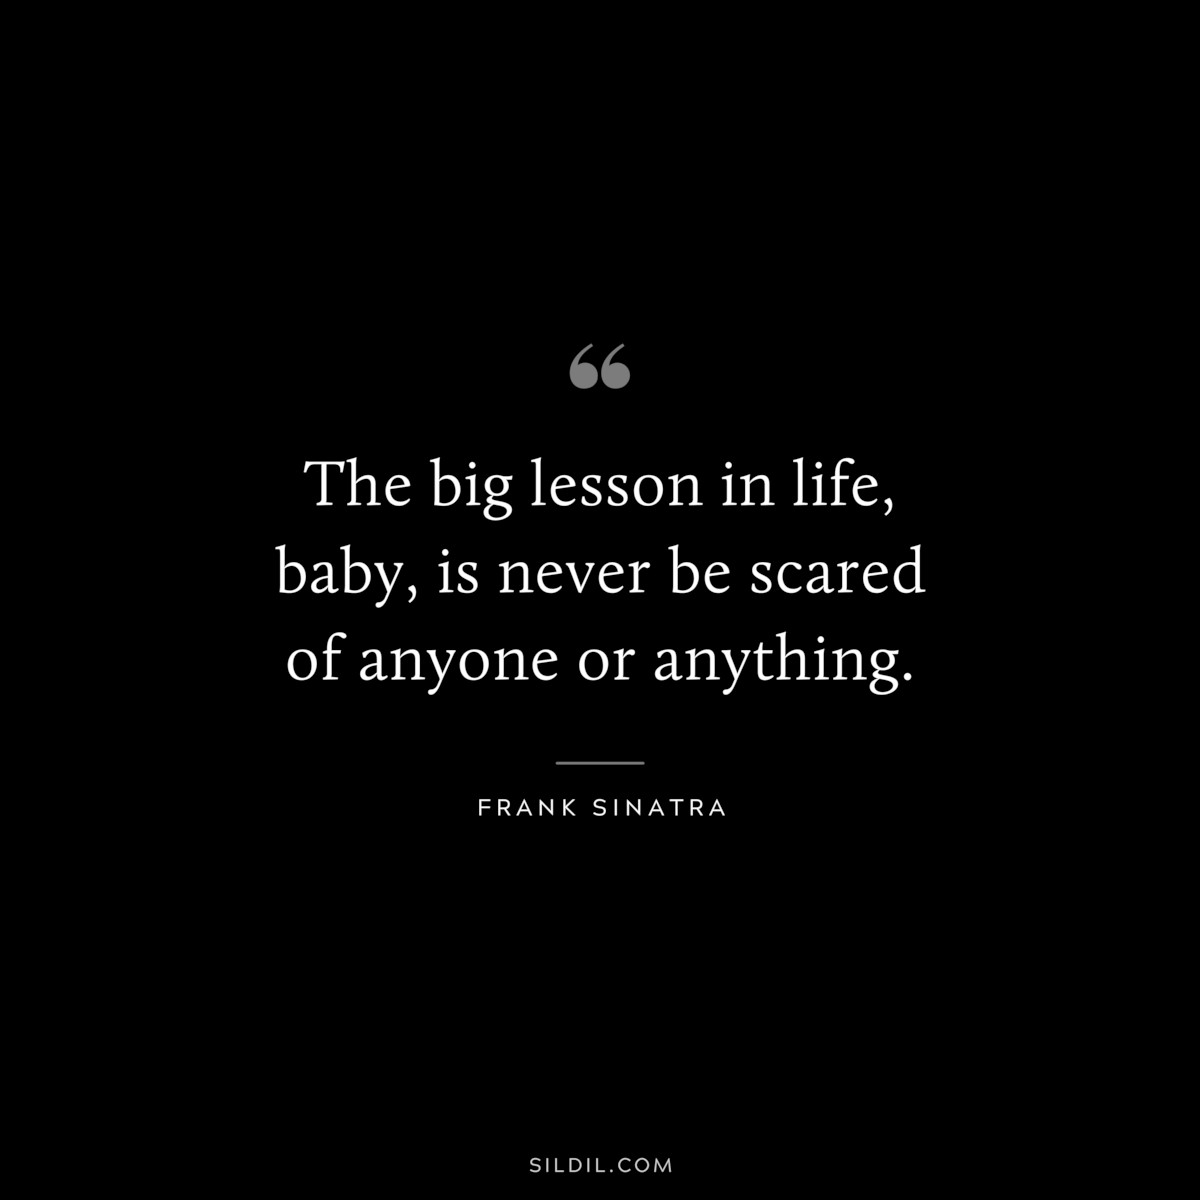 The big lesson in life, baby, is never be scared of anyone or anything. ― Frank Sinatra